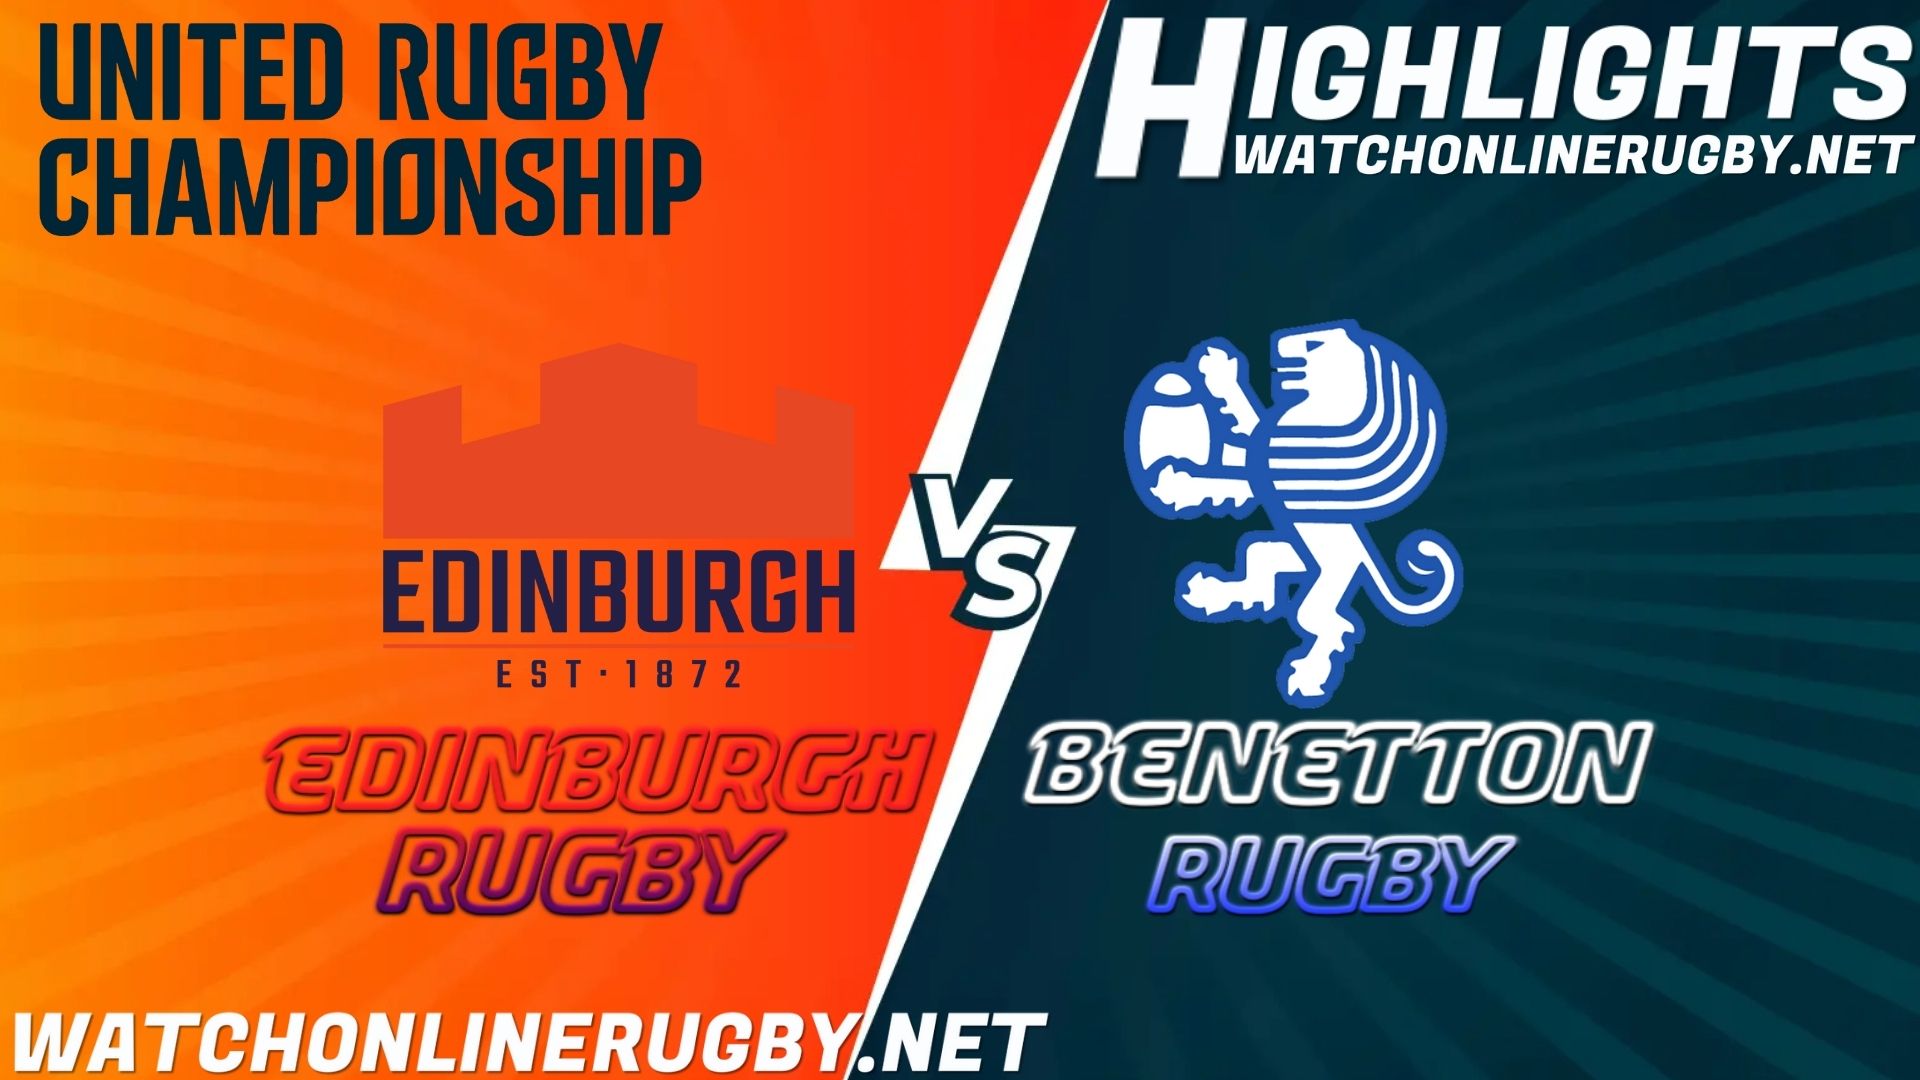 Edinburgh Rugby Vs Benetton Rugby Rugby United Rugby Championship 2021 RD 7